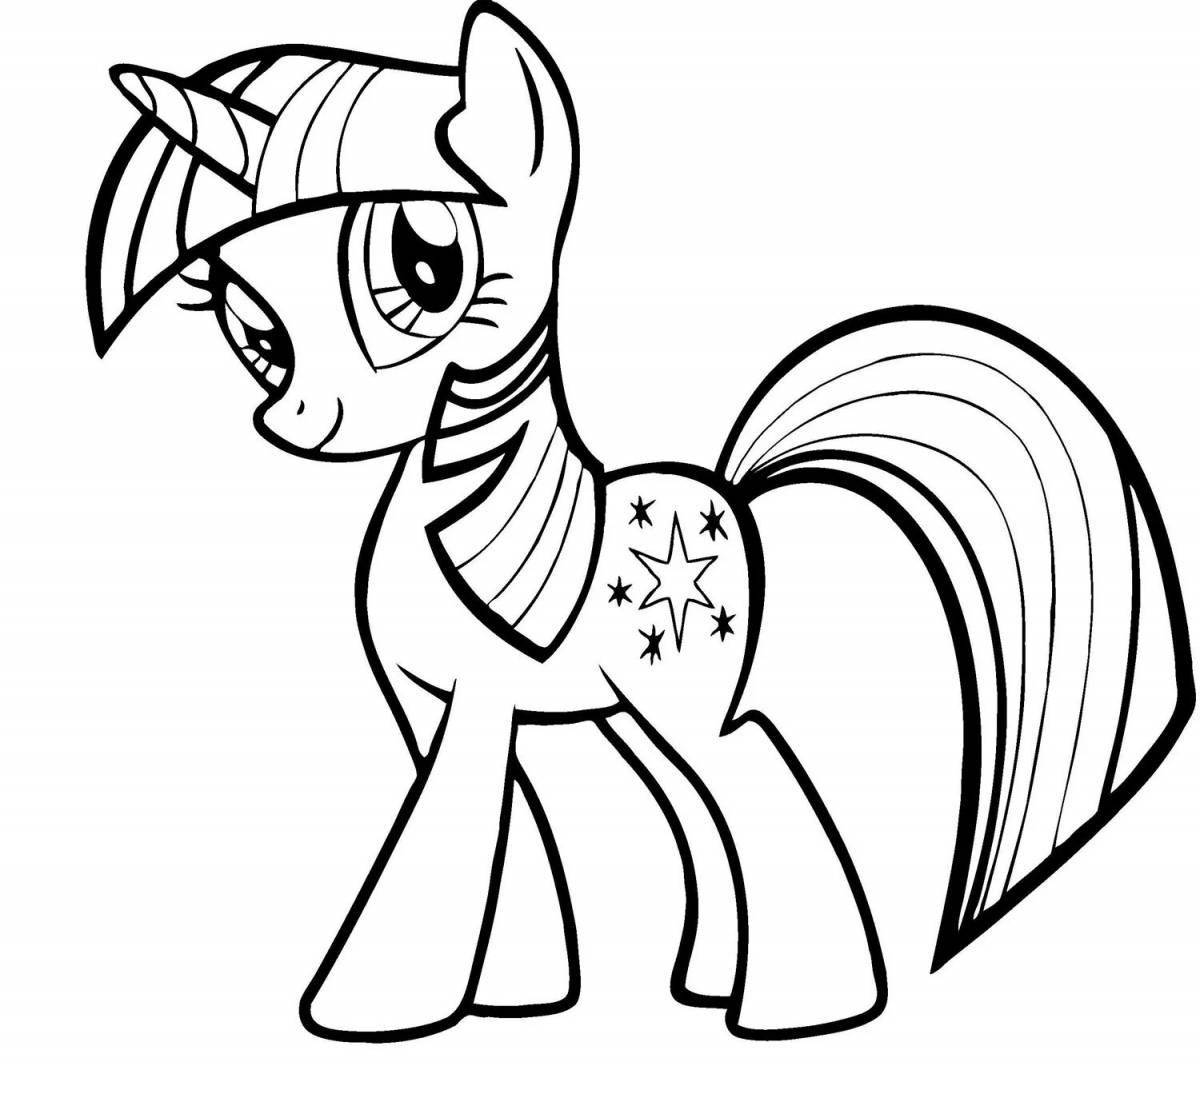 Coloring page happy pony for children 4-5 years old